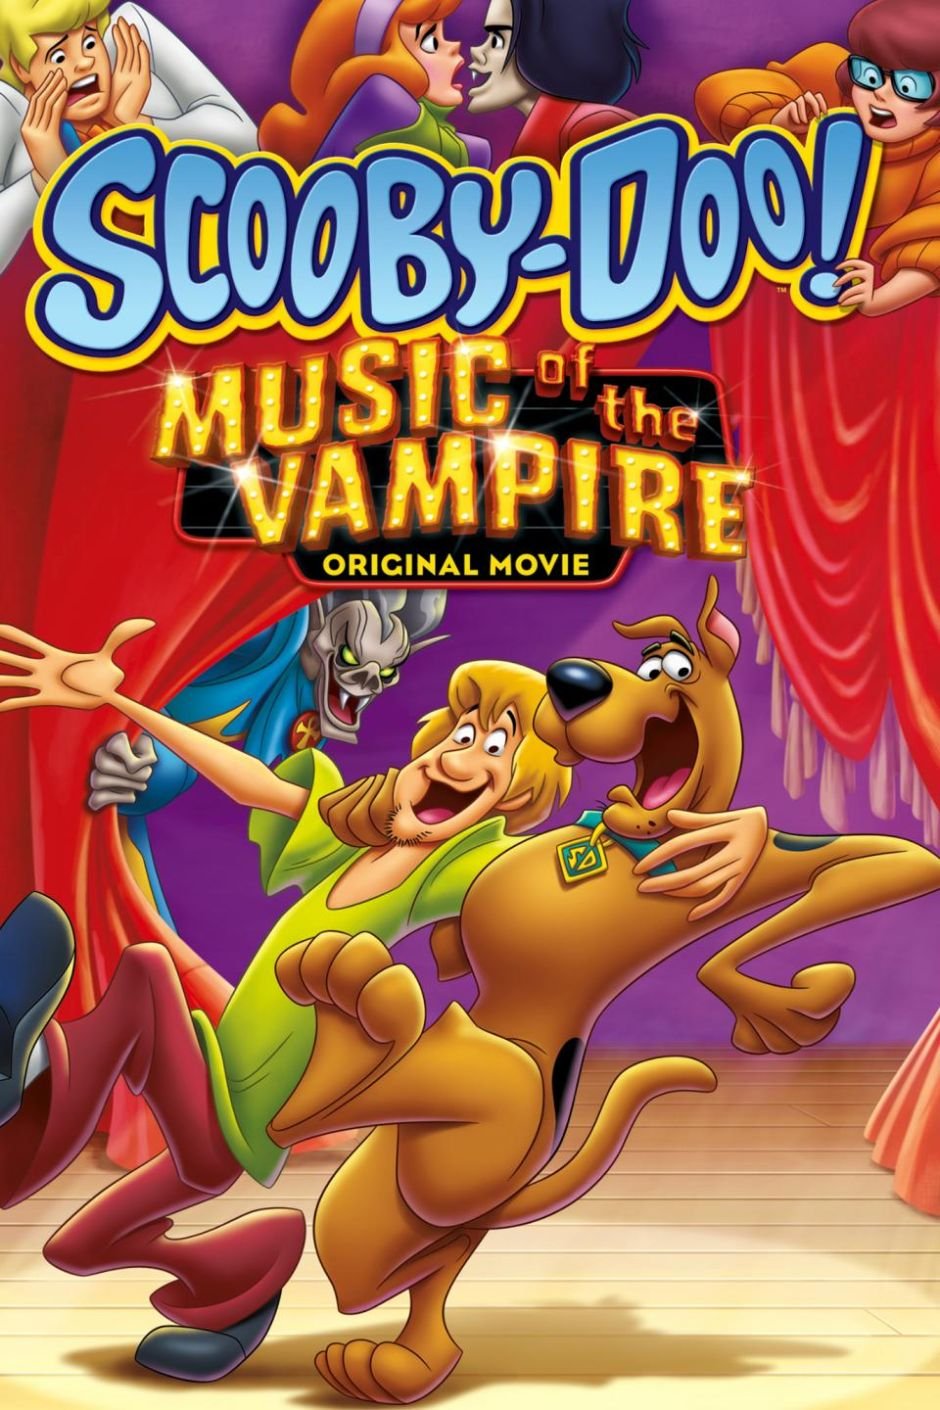 L'affiche du film Scooby-Doo! Music of the Vampire